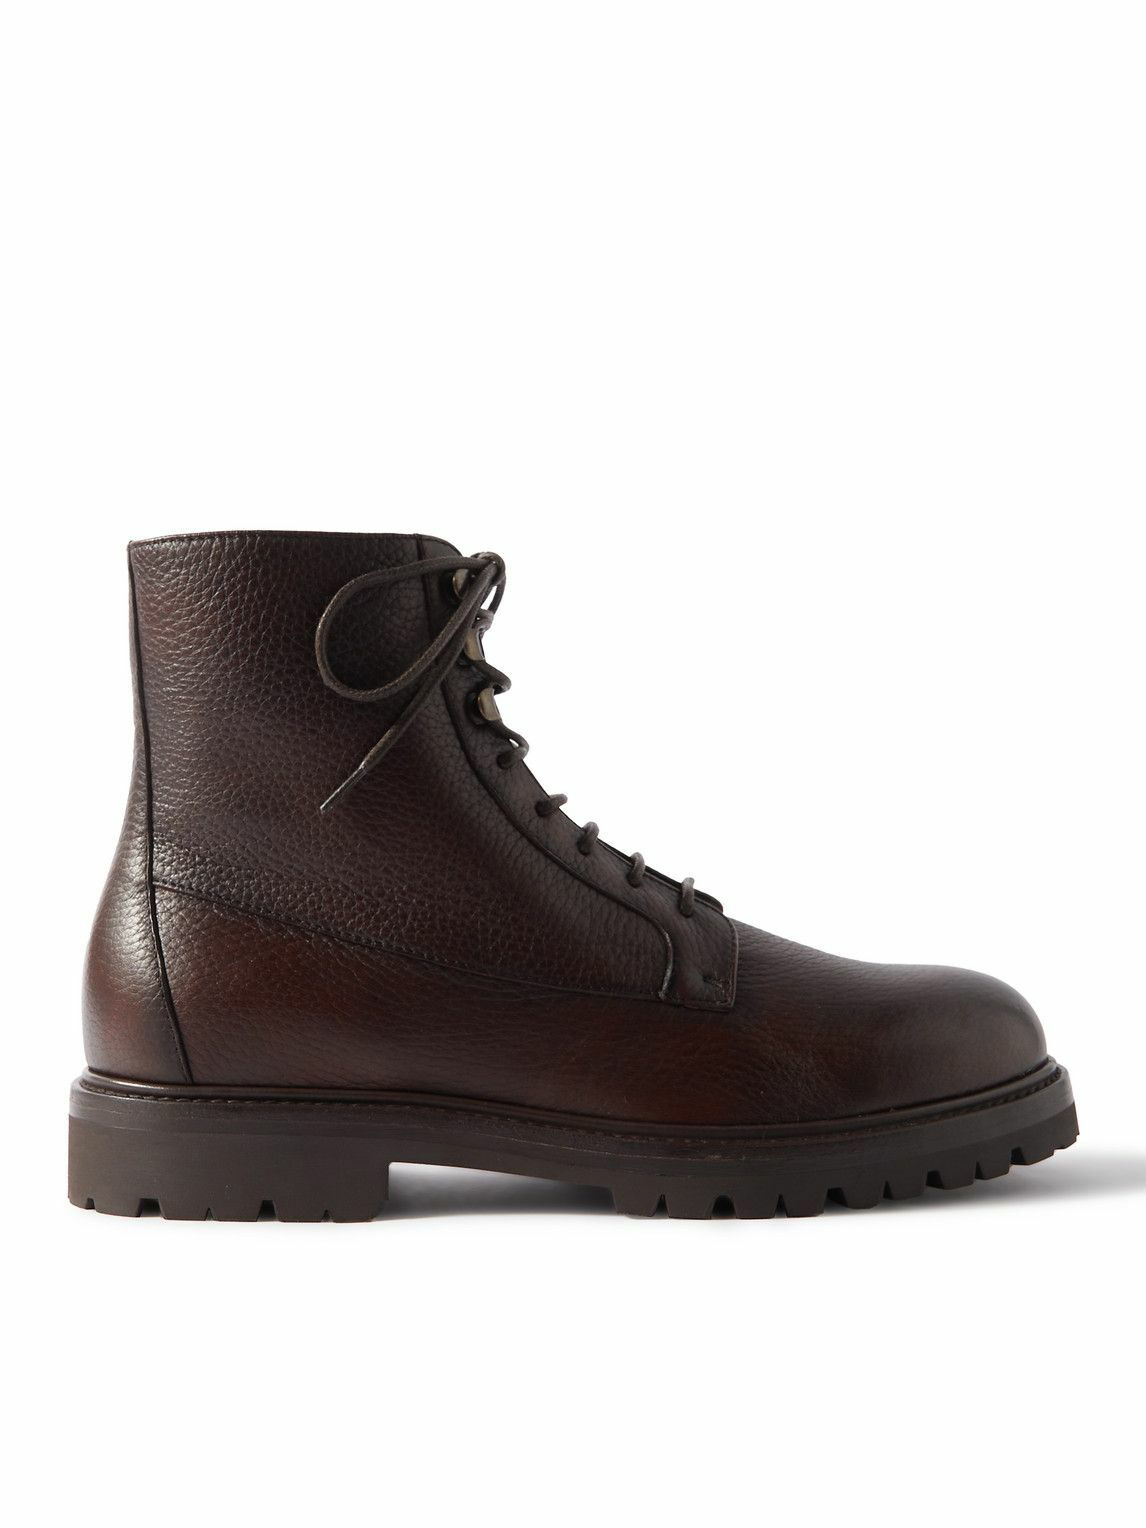 Brunello Cucinelli - Shearling-Lined Full-Grain Leather Hiking 